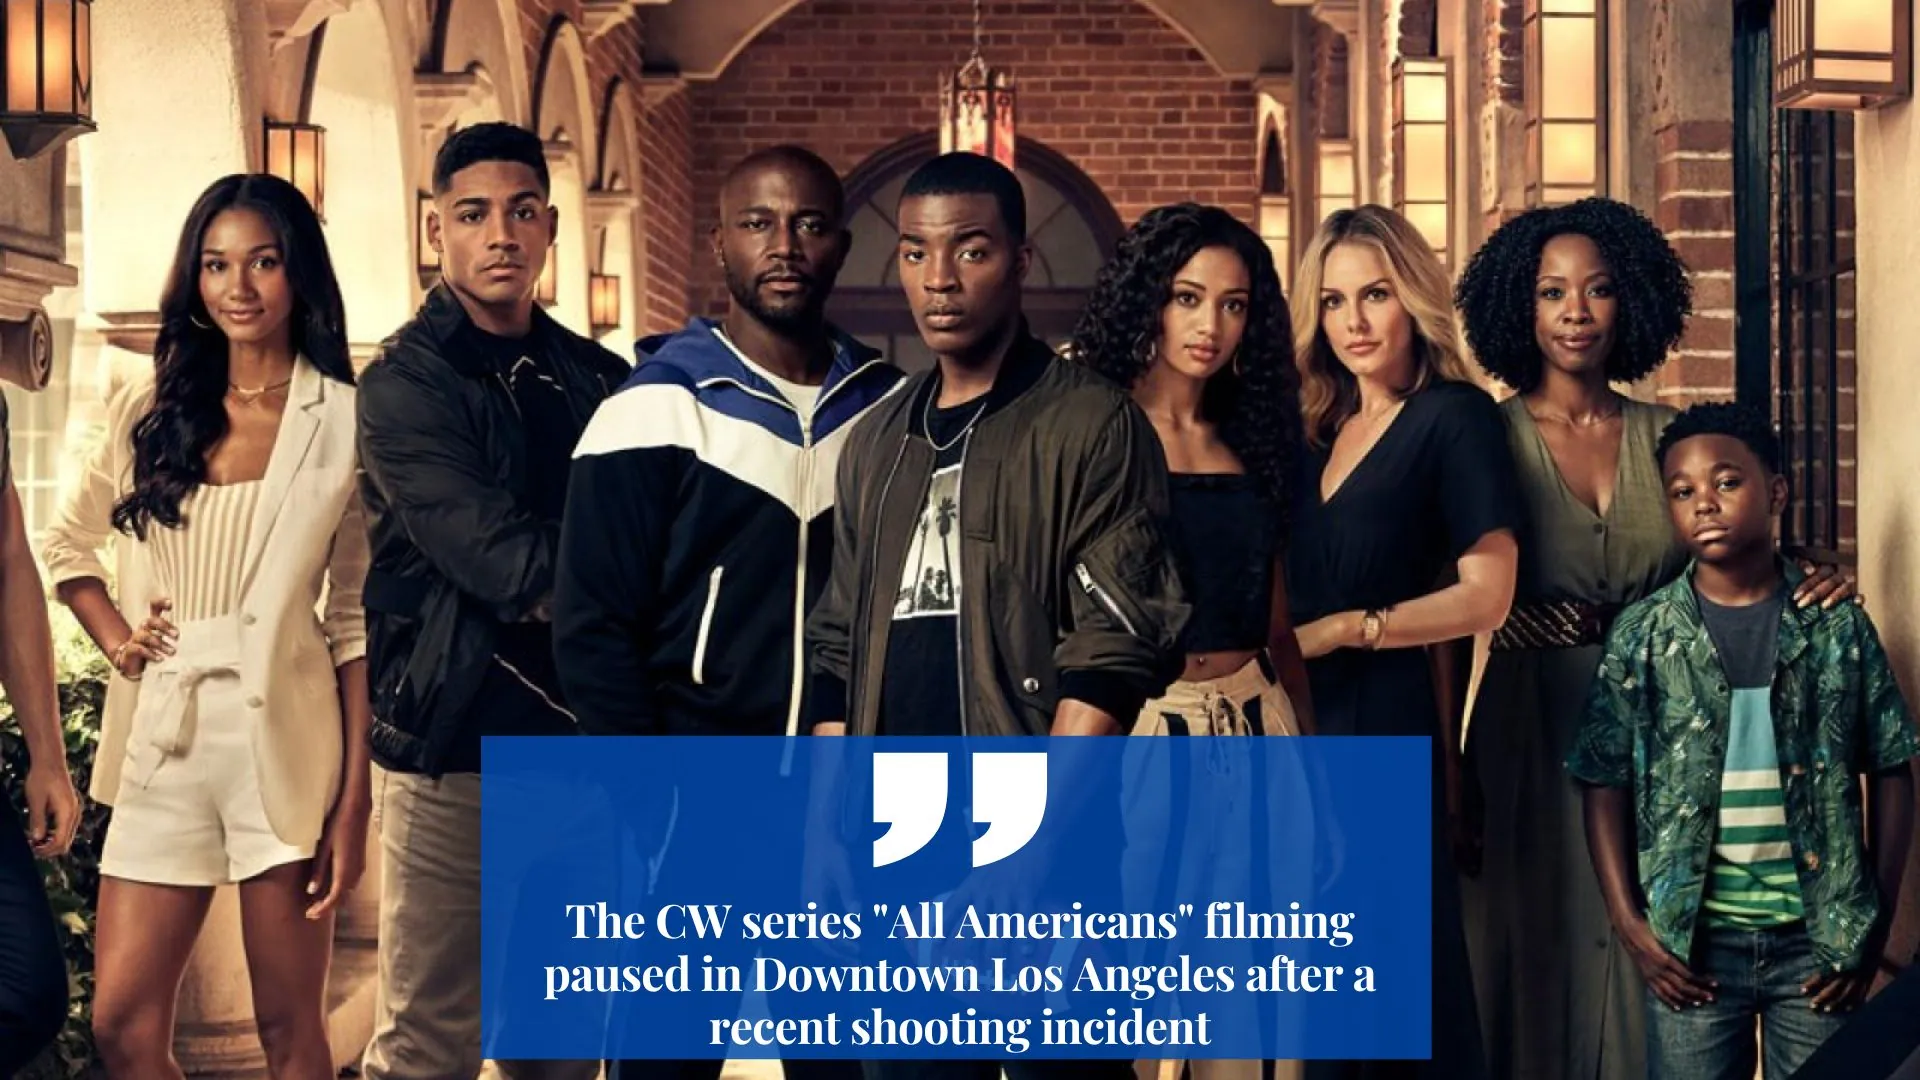 The CW series All Americans filming paused in Downtown Los Angeles after a recent shooting incident (Image credit: Netflix)